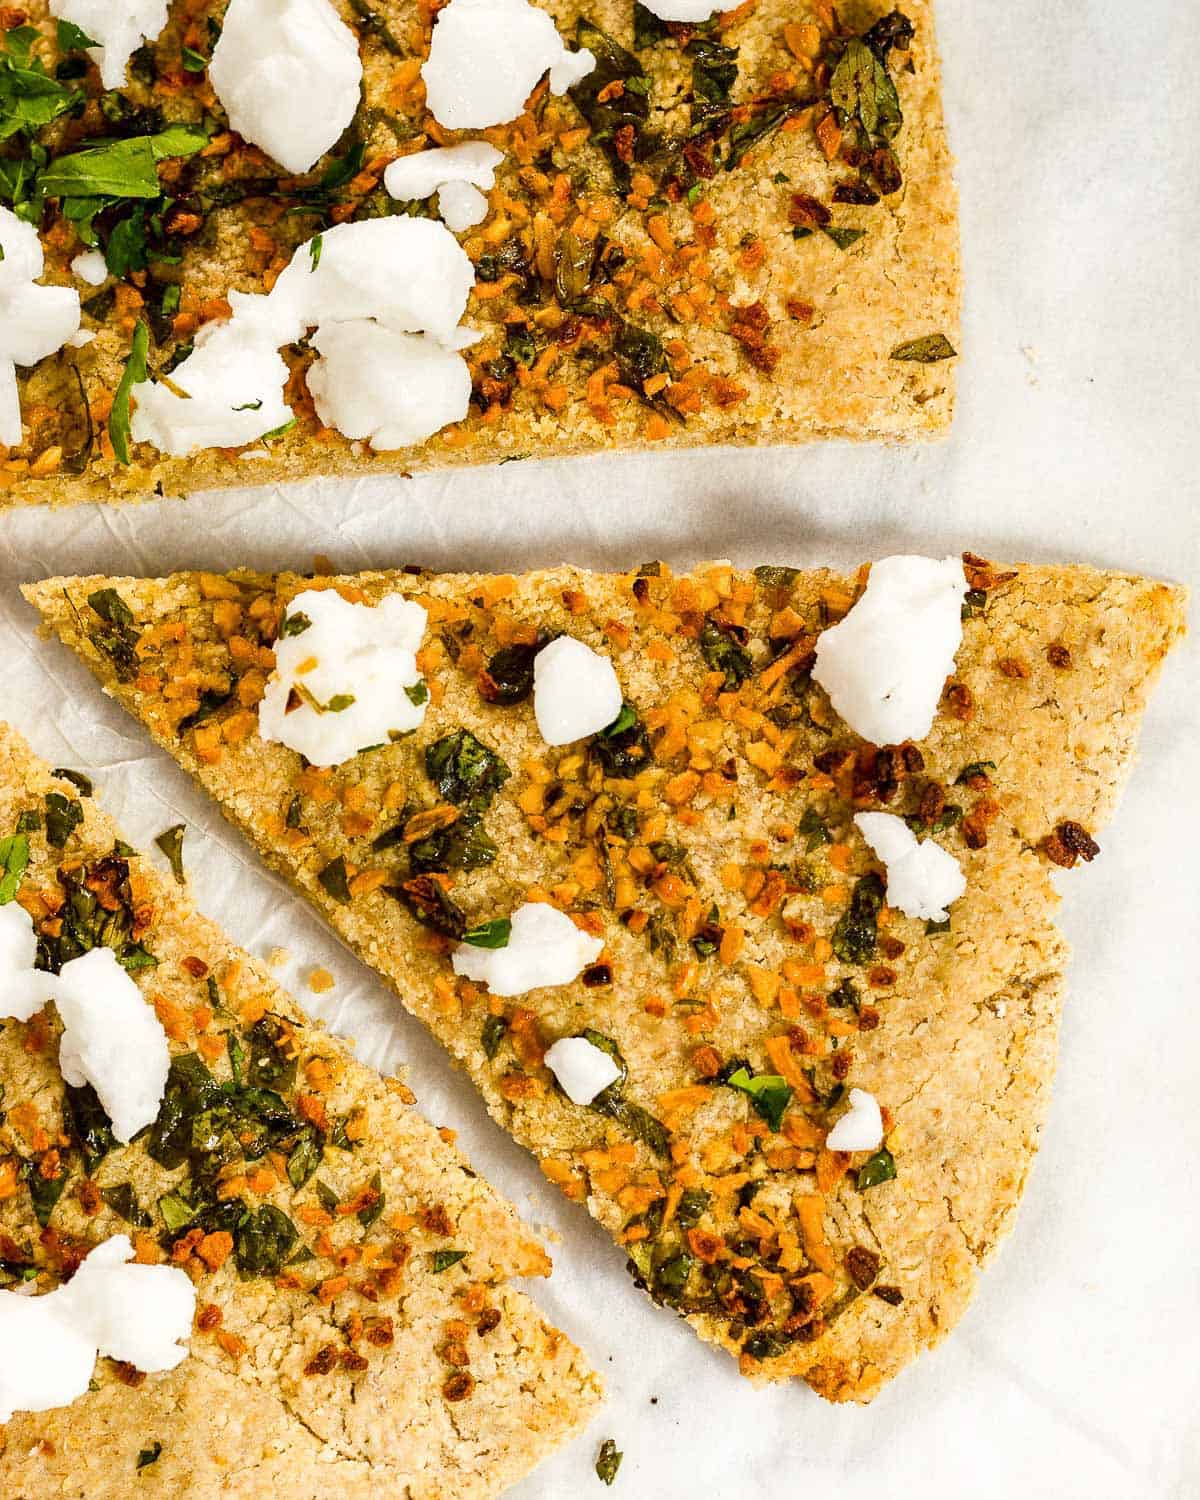 Oat Pizza Crust with garlic, parsley and feta. A slice has been cut and is pulled away from the rest of the pizza.